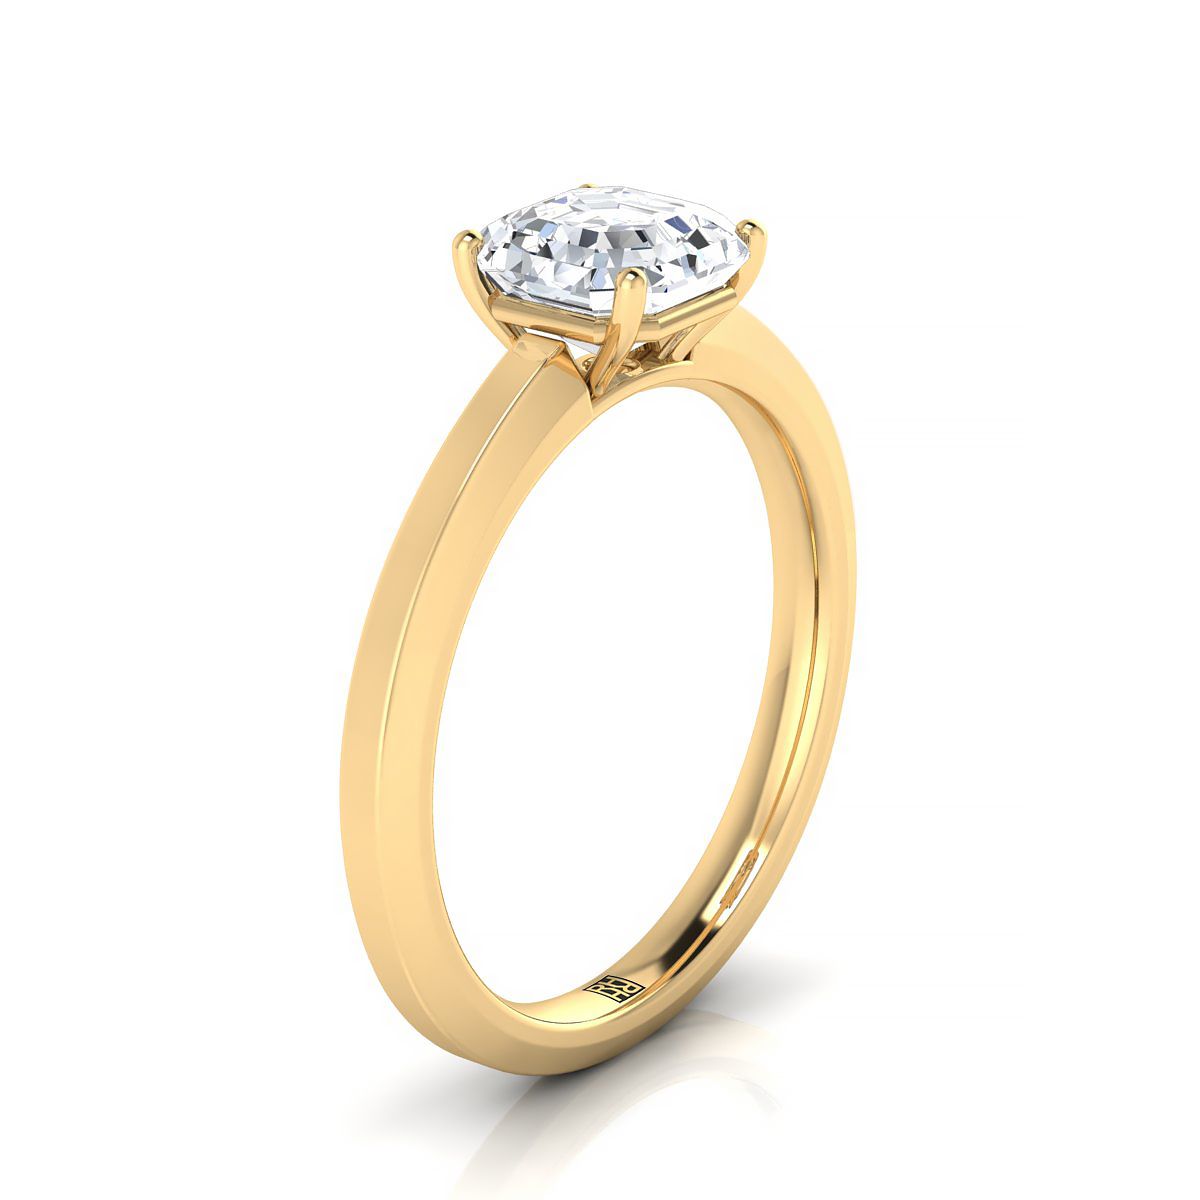 14K Yellow Gold Asscher Cut  Beveled Edge Comfort Style Bright Finish Solitaire Engagement Ring